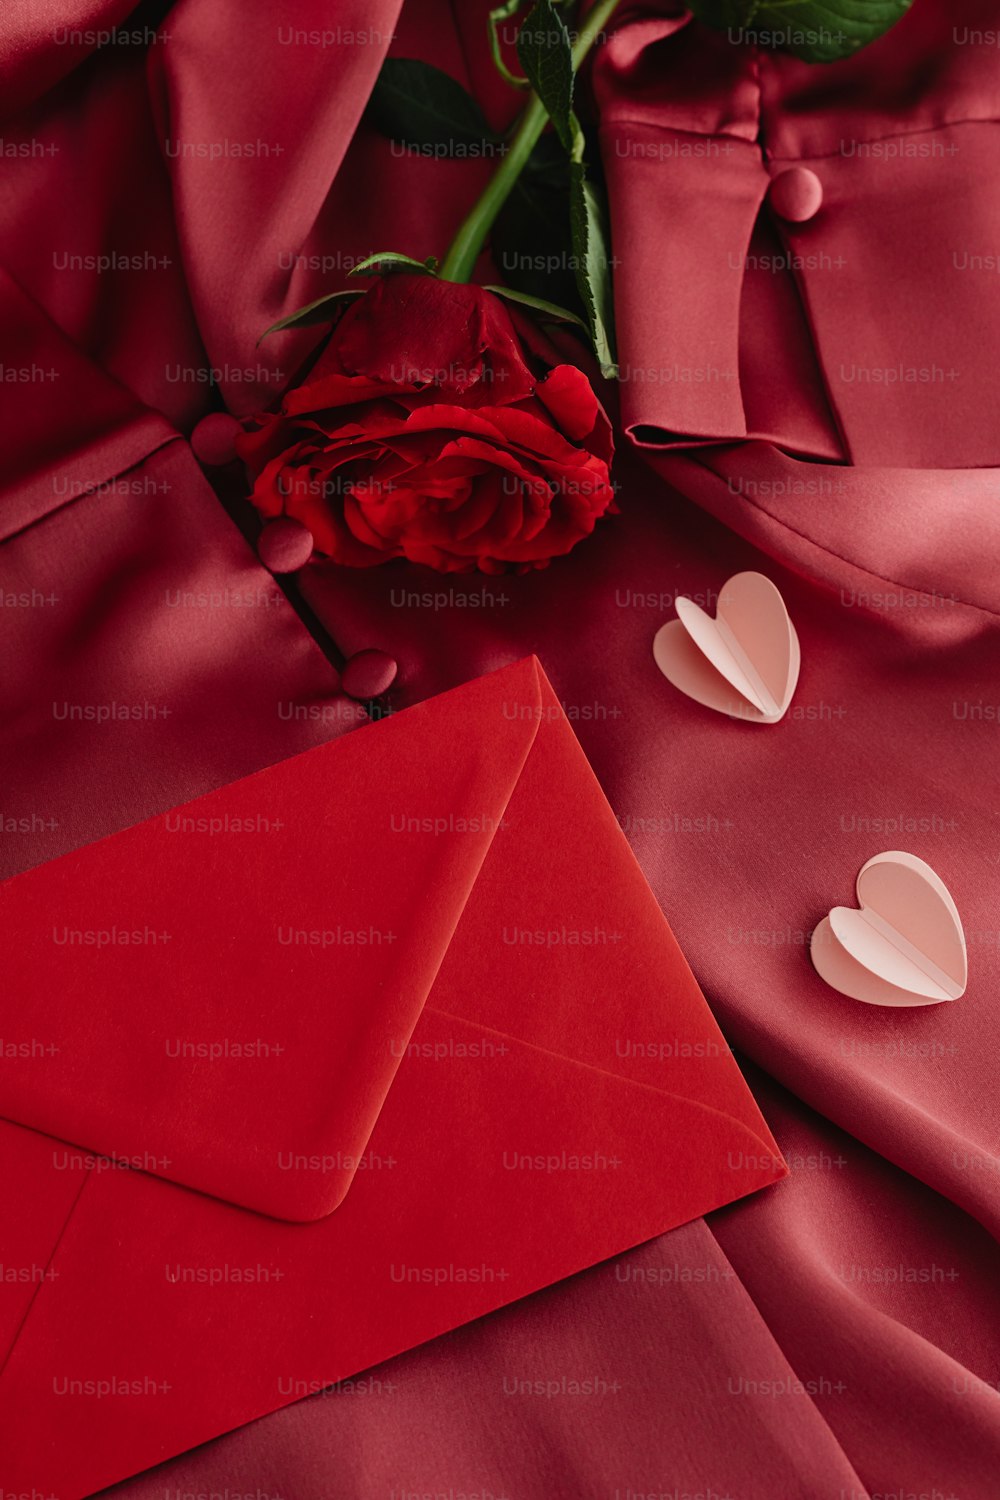 a red rose and a red envelope with hearts